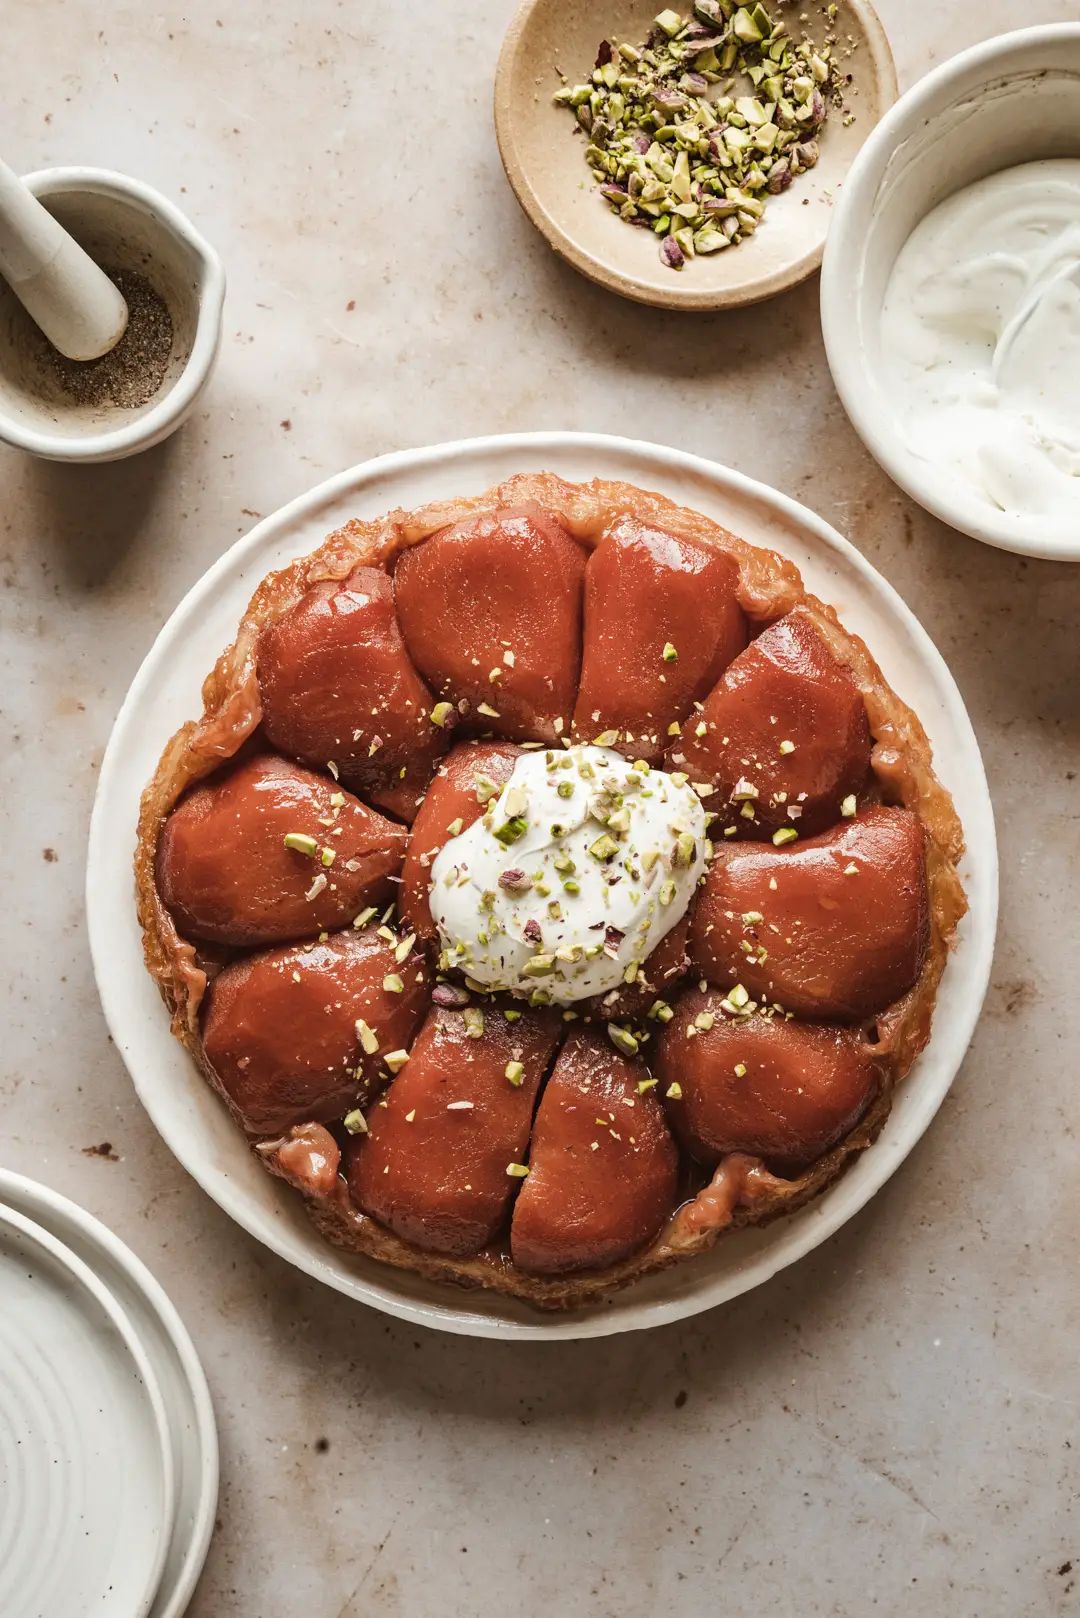 This quince tarte tatin topped with cardamom crème fraîche & pistachios is the ultimate way to display the glory of this ancient fruit